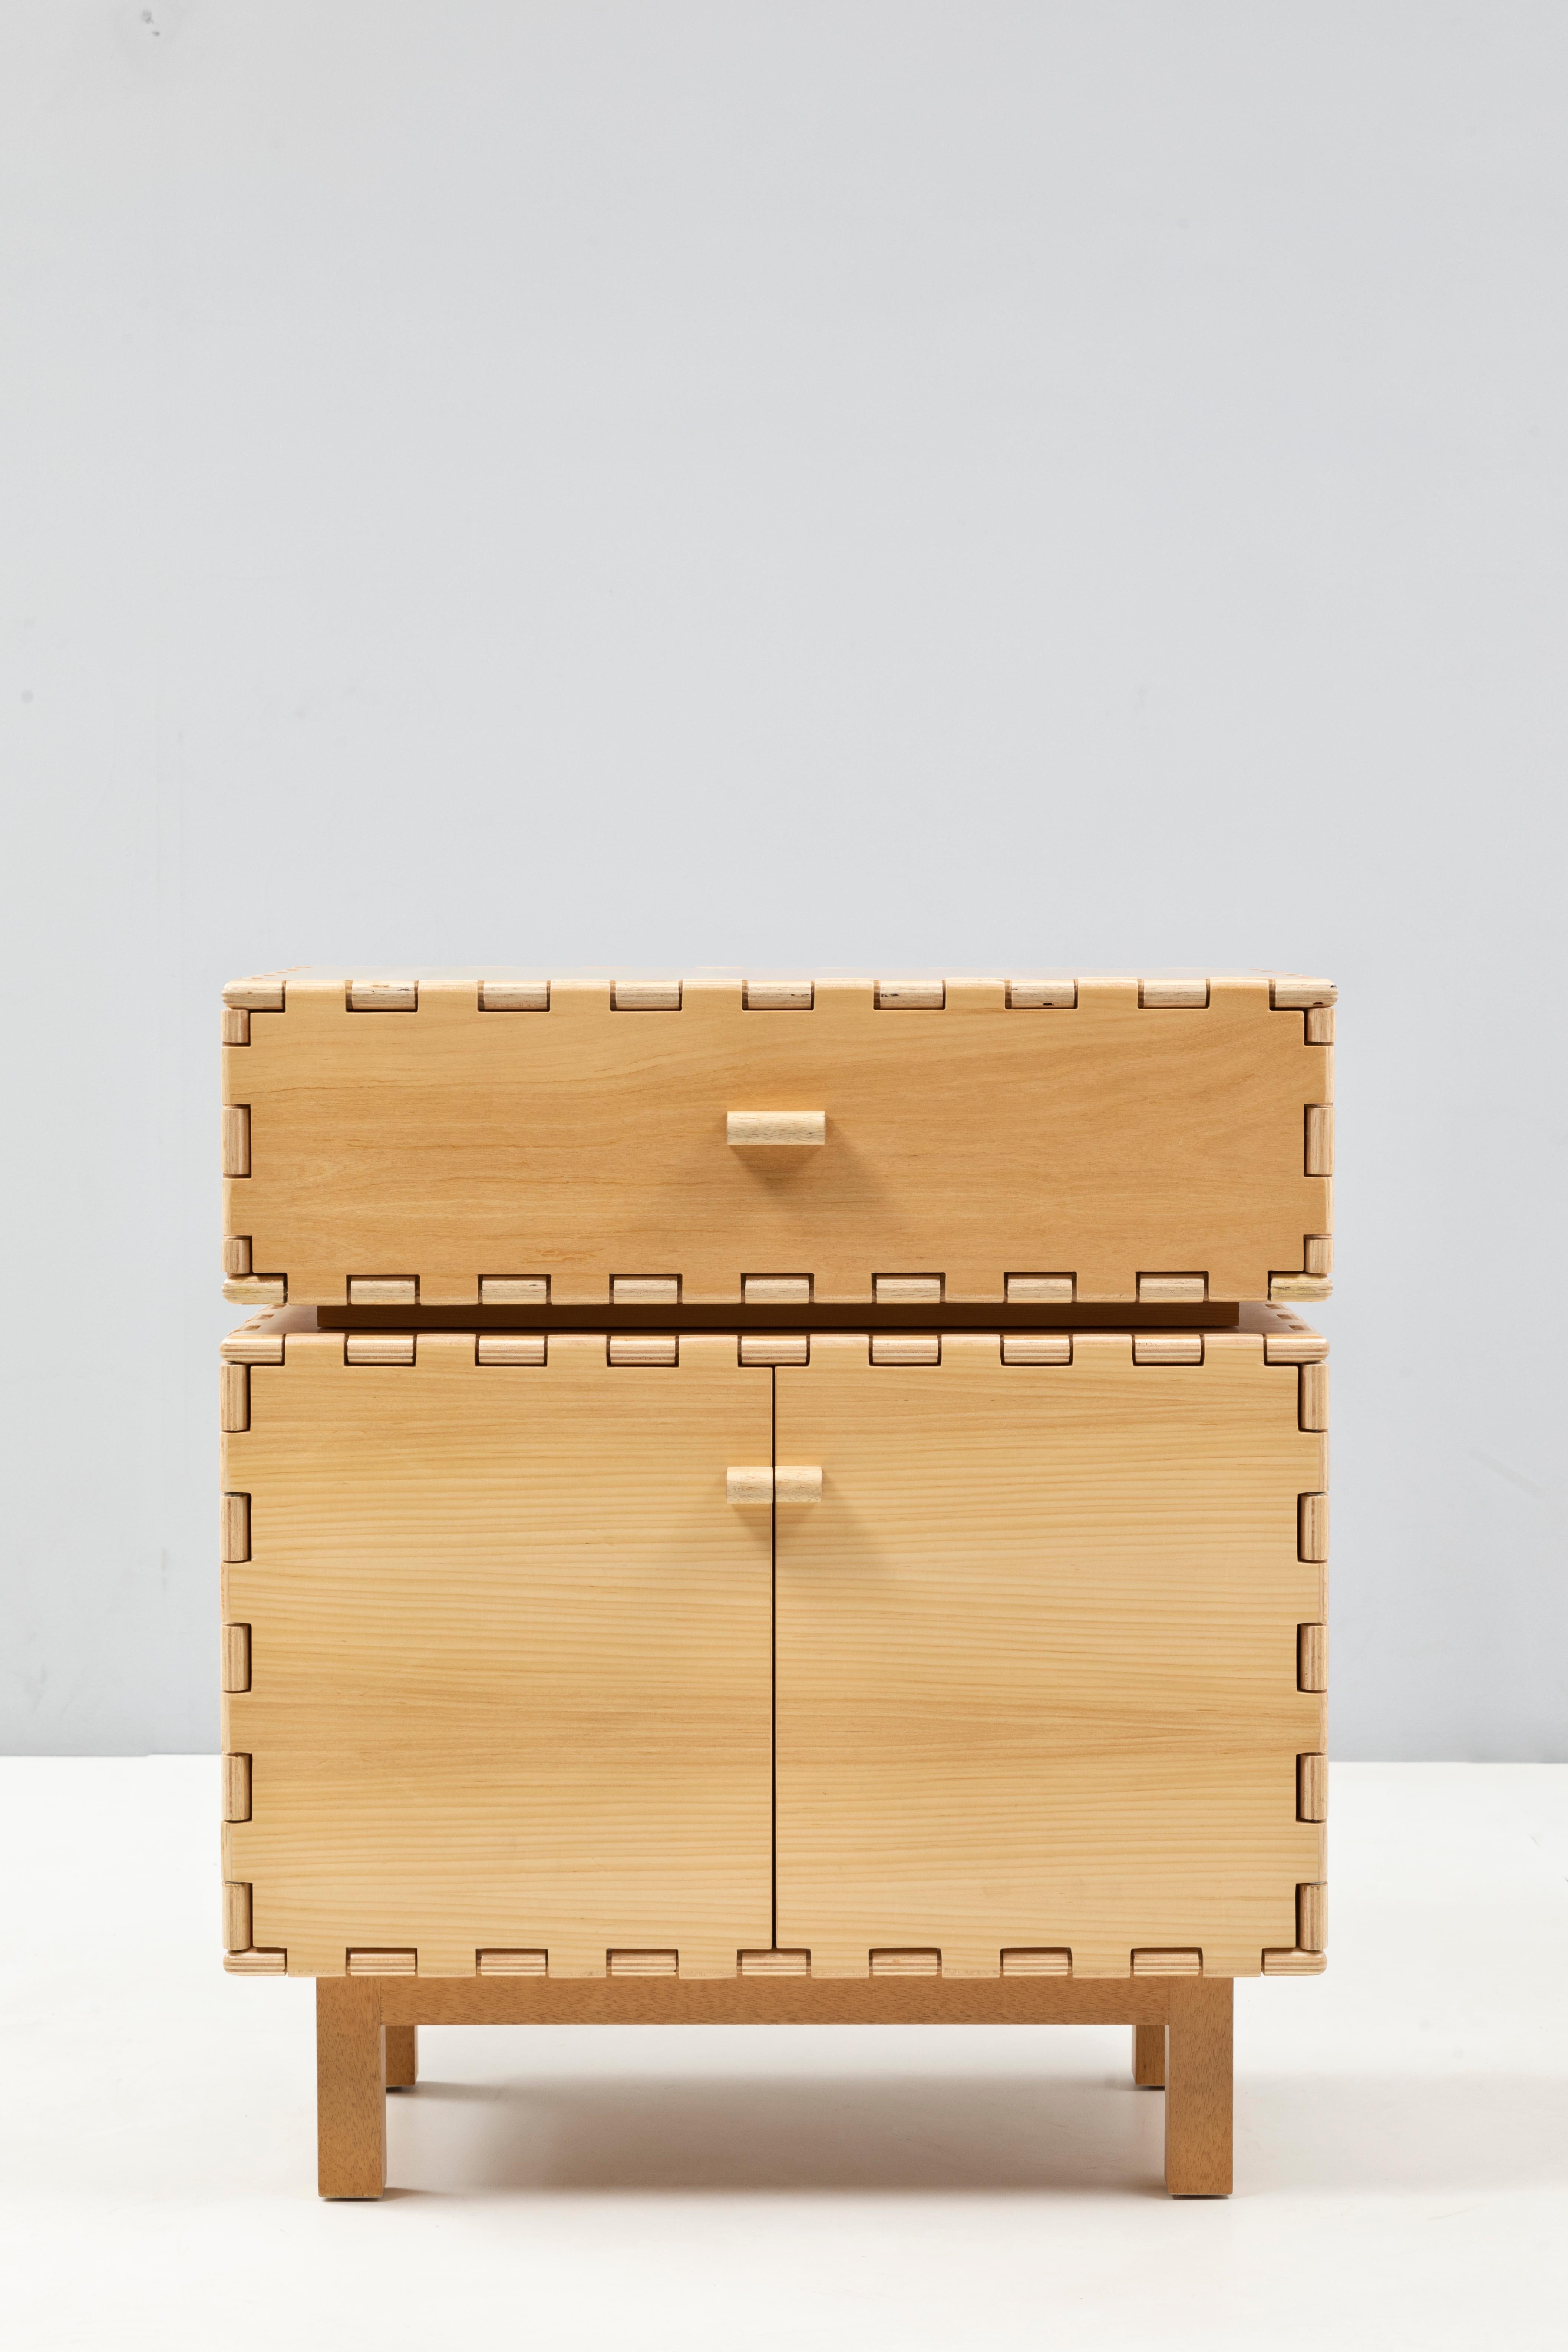 Handcrafted cabinet in natural wood. The lacquer color highlights the simplicity of the interlocking panels design. The modular quality of the collection allow each cabinet to be combine with other pieces within the collection to create different